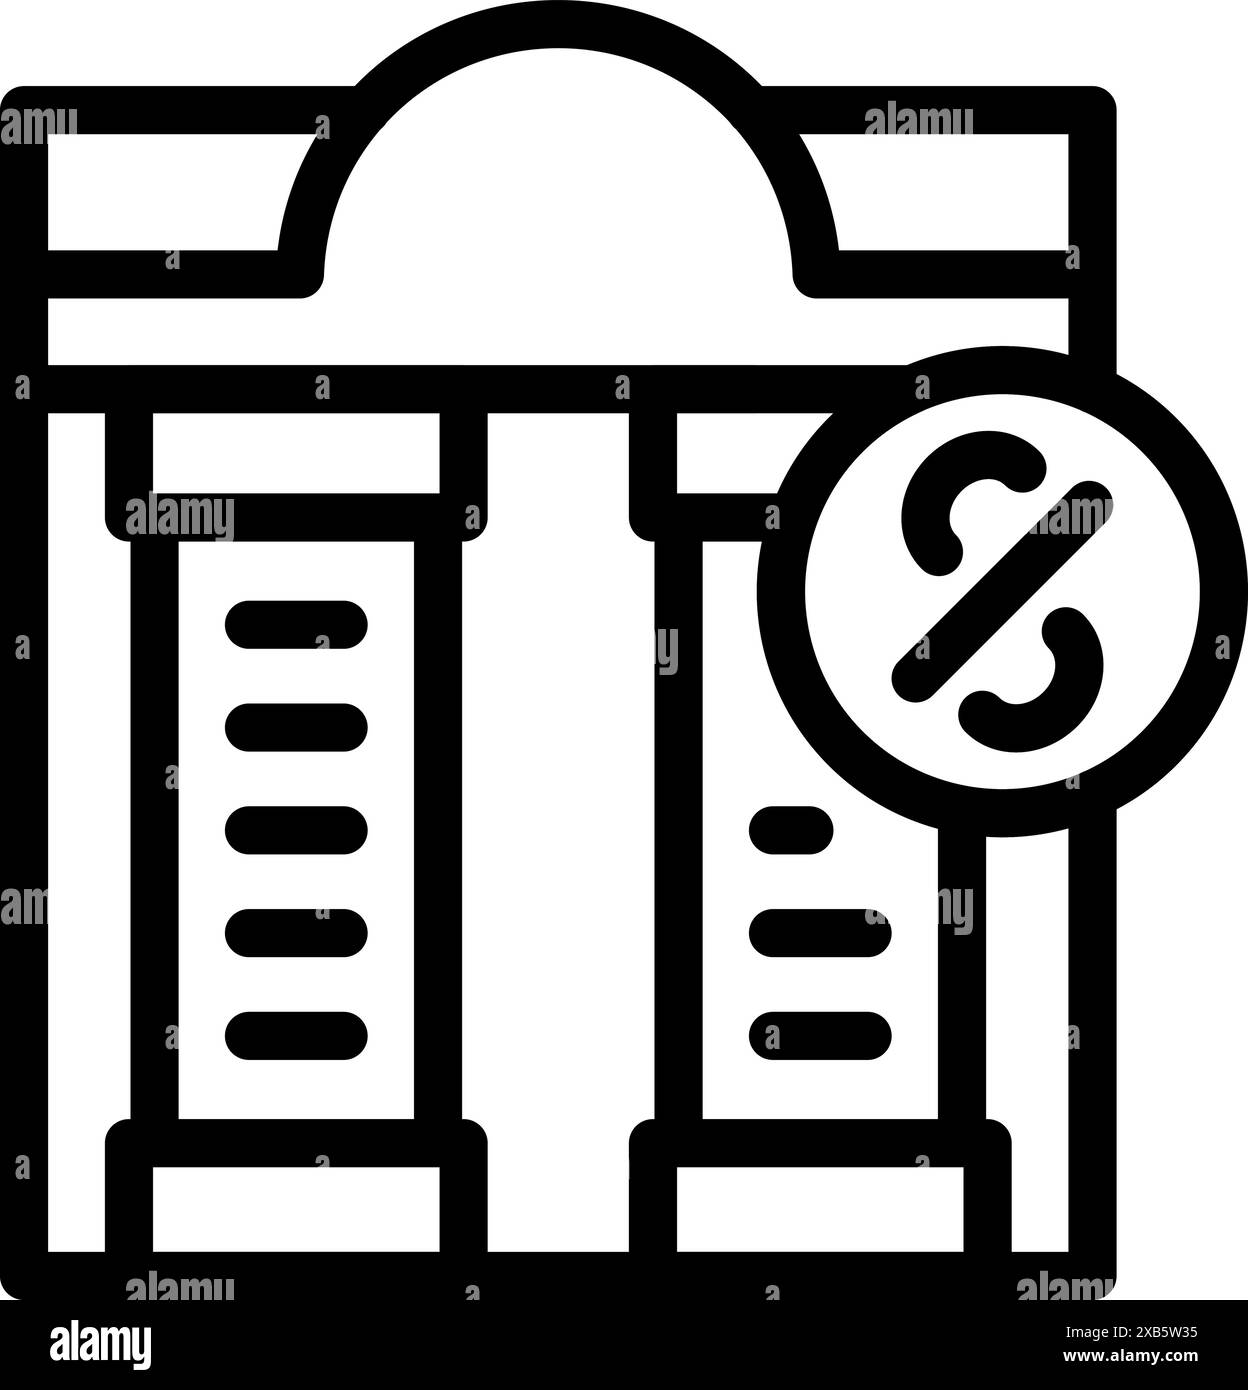 Line art icon of a government building with columns and a crossed out percentage sign, representing budget cuts or lack of funding Stock Vector